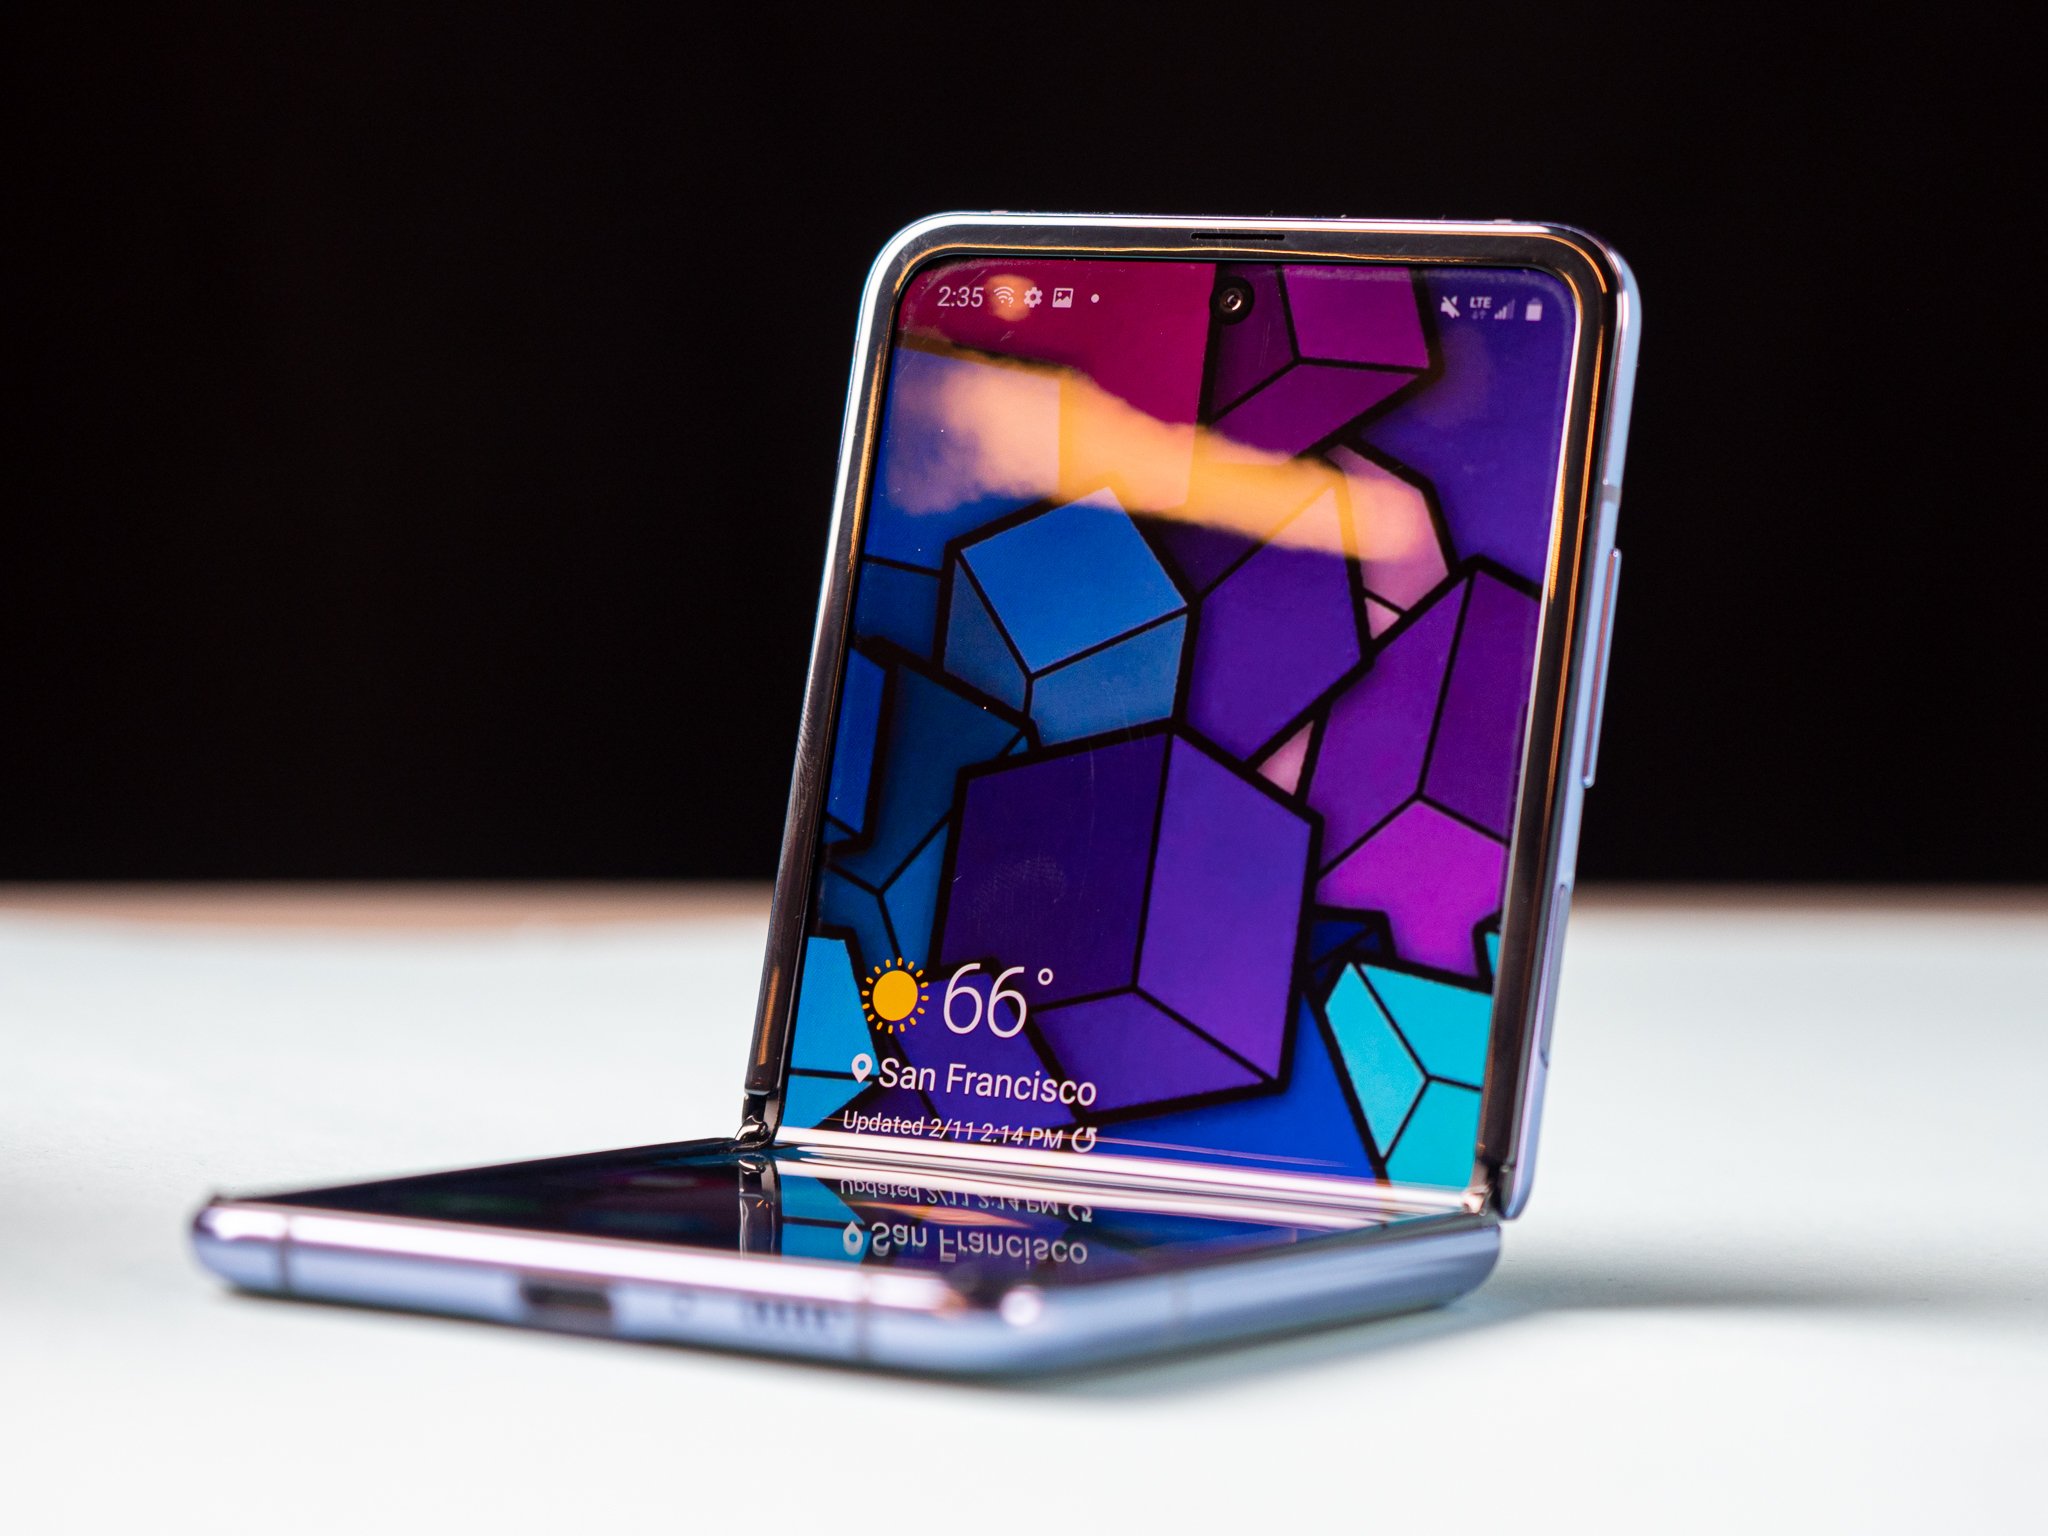 Samsung Galaxy Z Flip review: The weird and wonderful foldable